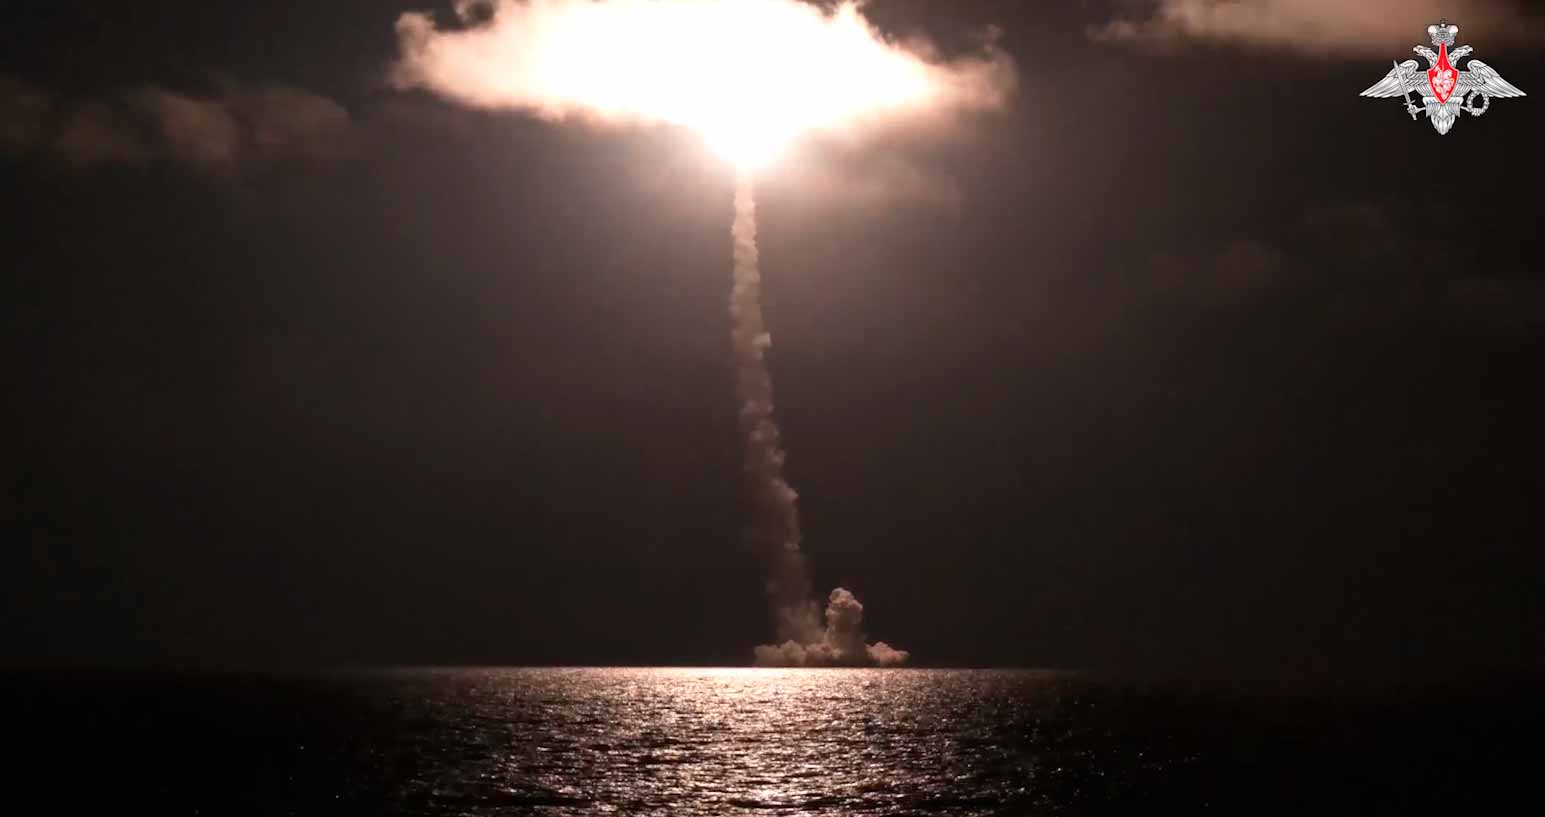 Video shows the launch of a Bulava ballistic missile from a Russian submarine. Photo: Telegram t.me/mod_russia